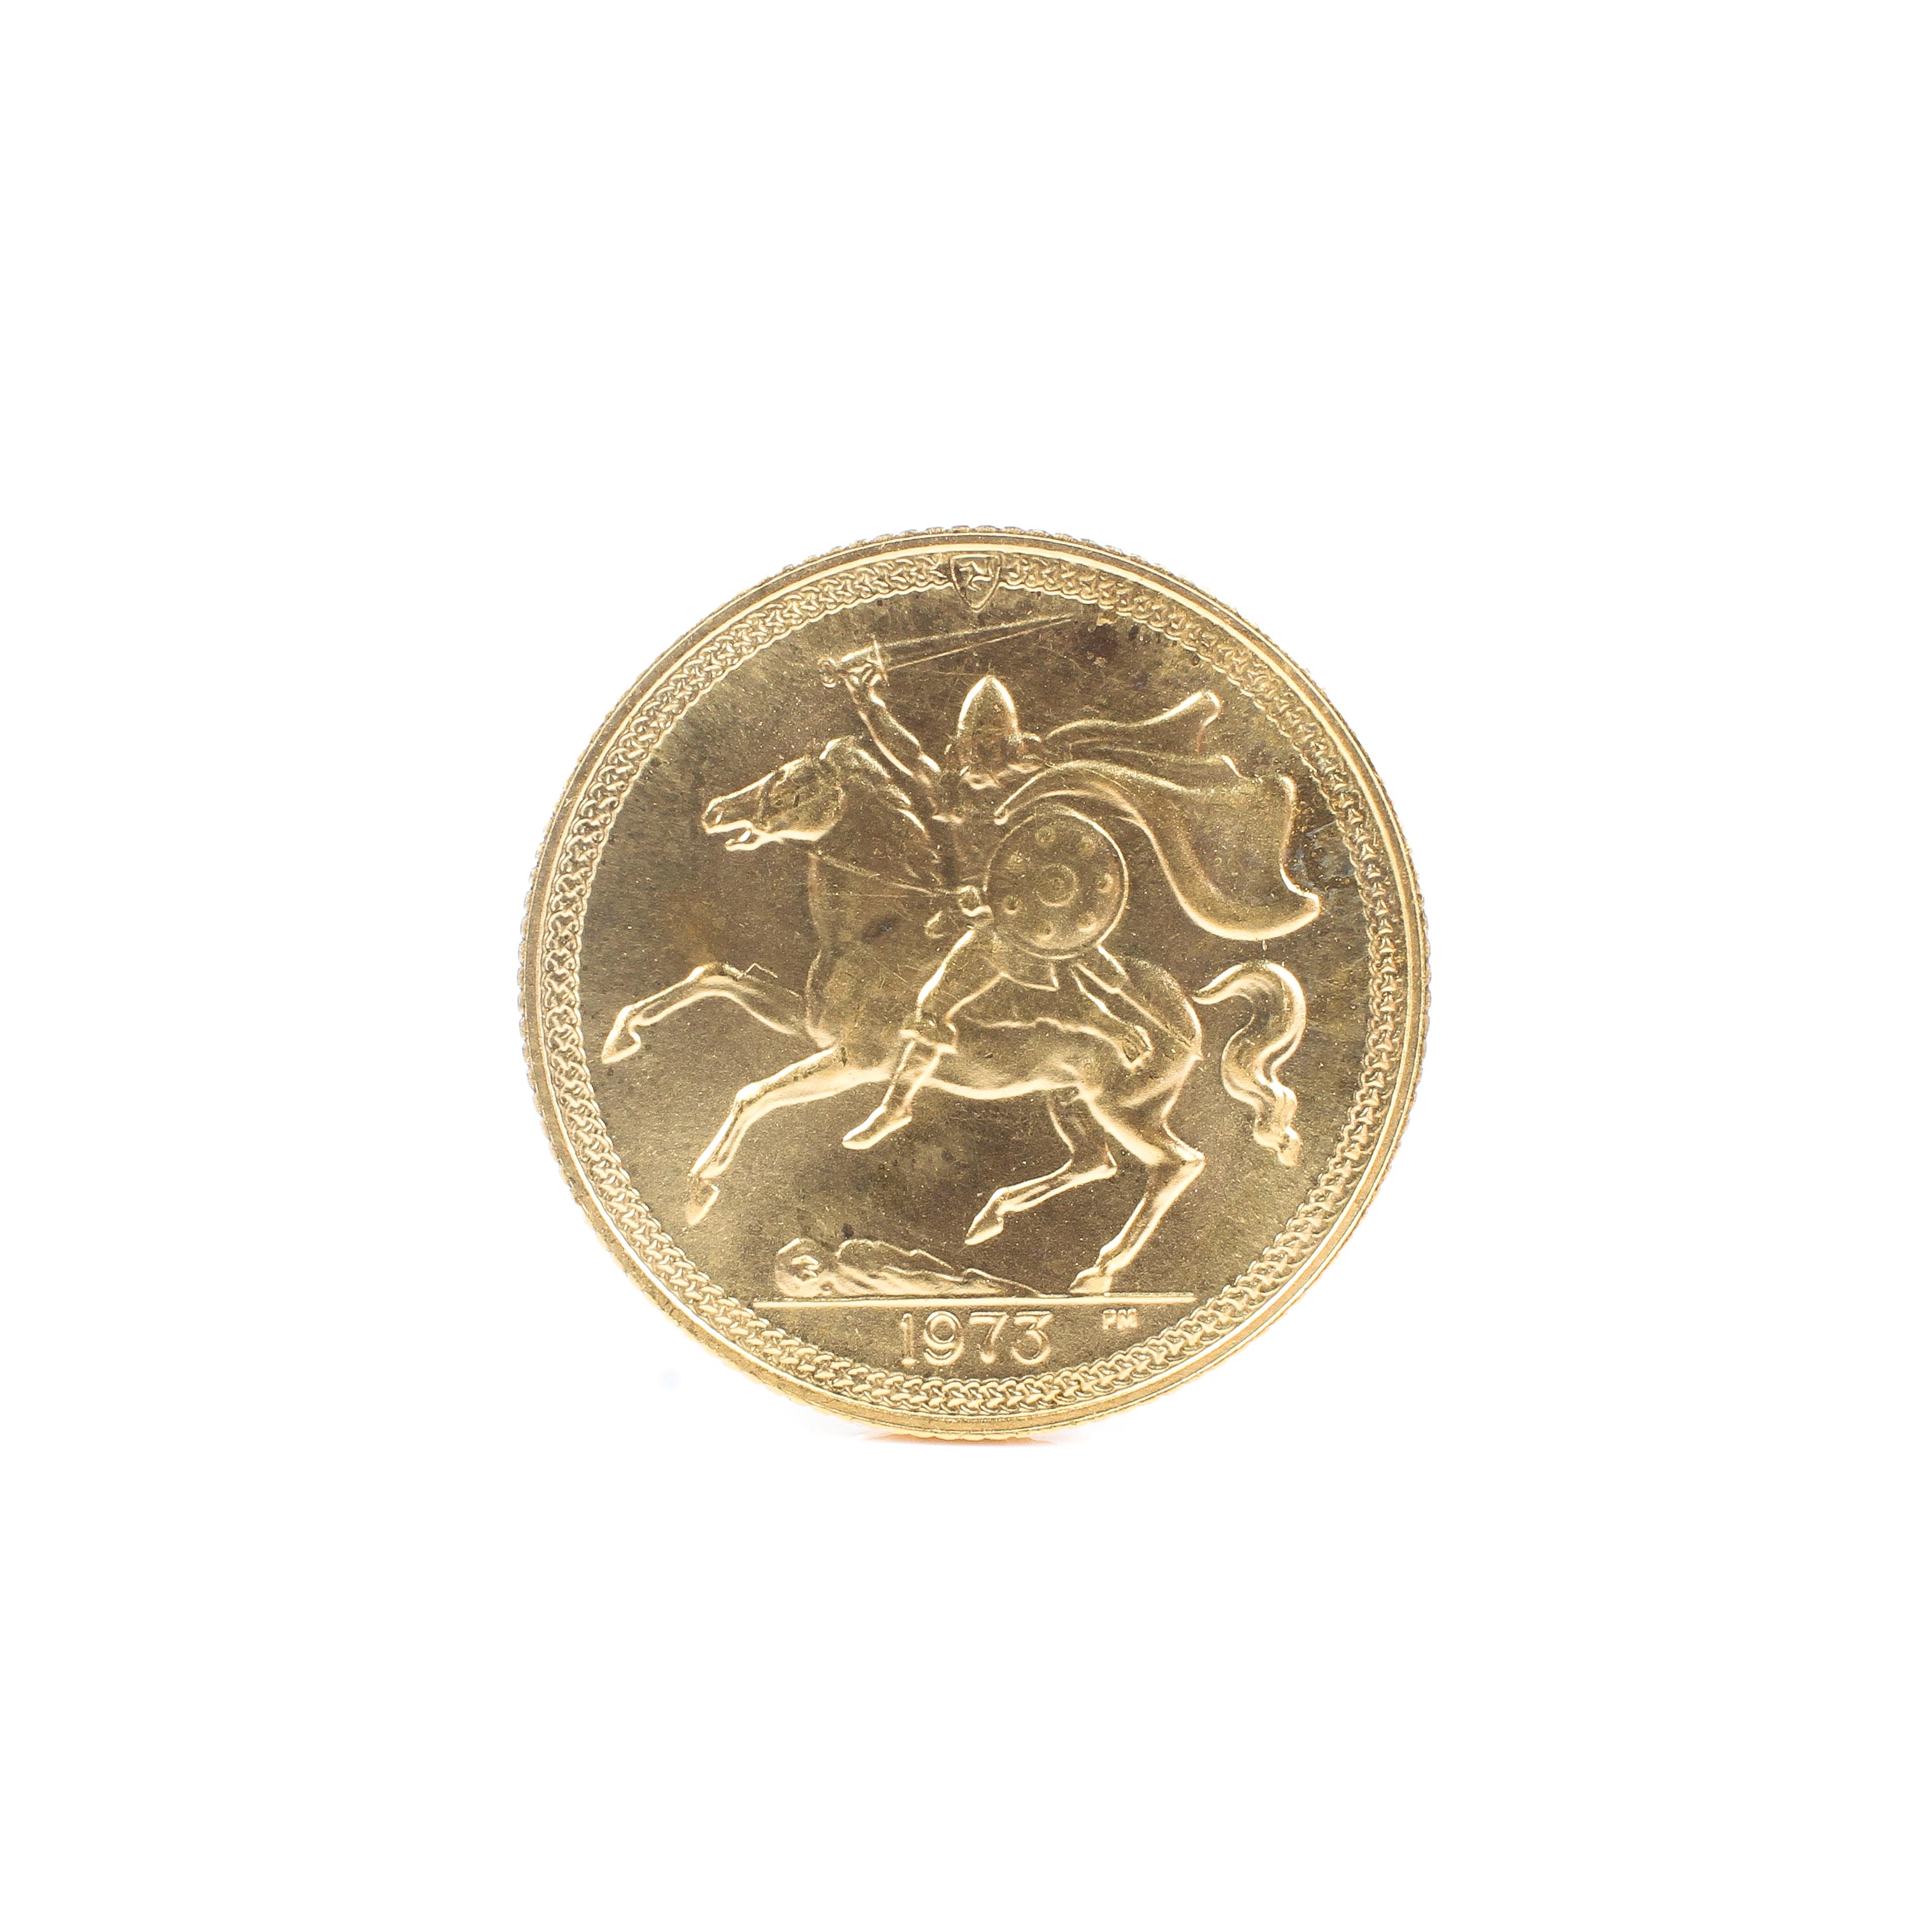 An Isle of Man 1973 Gold sovereign 8.0g. - Image 2 of 2